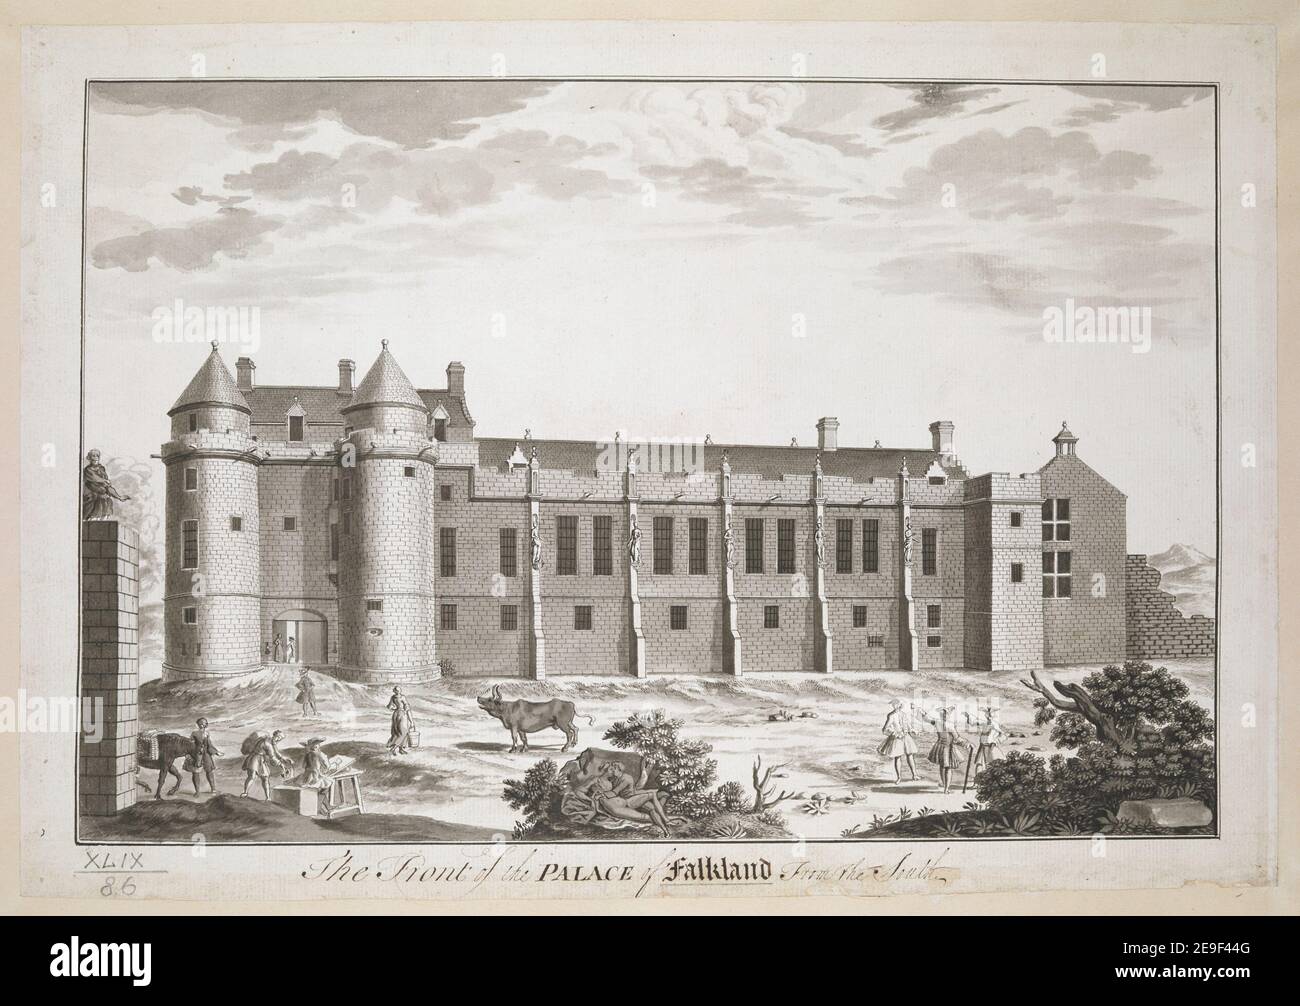 The front of the PALACE of Falkland From the South. Author  Elphinstone, John 49.86. Date of publication: [about 1740-1750]  Item type: 1 drawing Medium: pen and black ink with monochrome wash Dimensions: sheet 23.4 x 33.7 cm  Former owner: George III, King of Great Britain, 1738-1820 Stock Photo